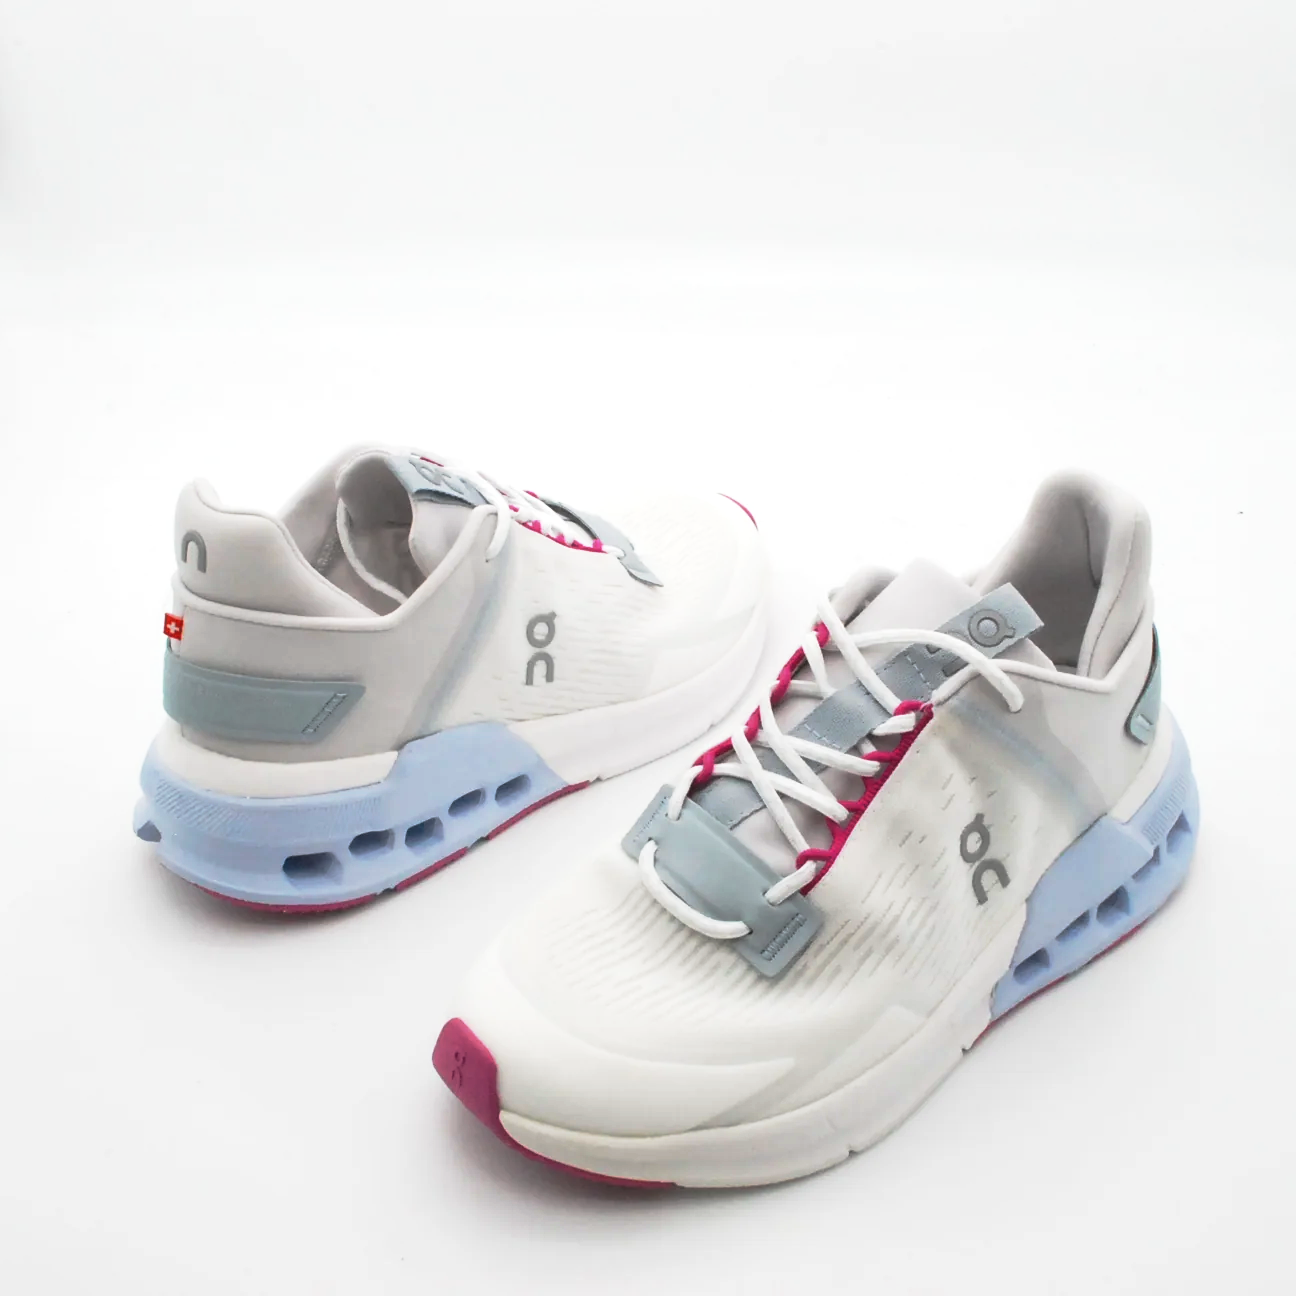 sneakers-on-cloudnova-flux-sneakers-2_47ede14f-5580-41cf-b3a6-fcaf93e748b1.png